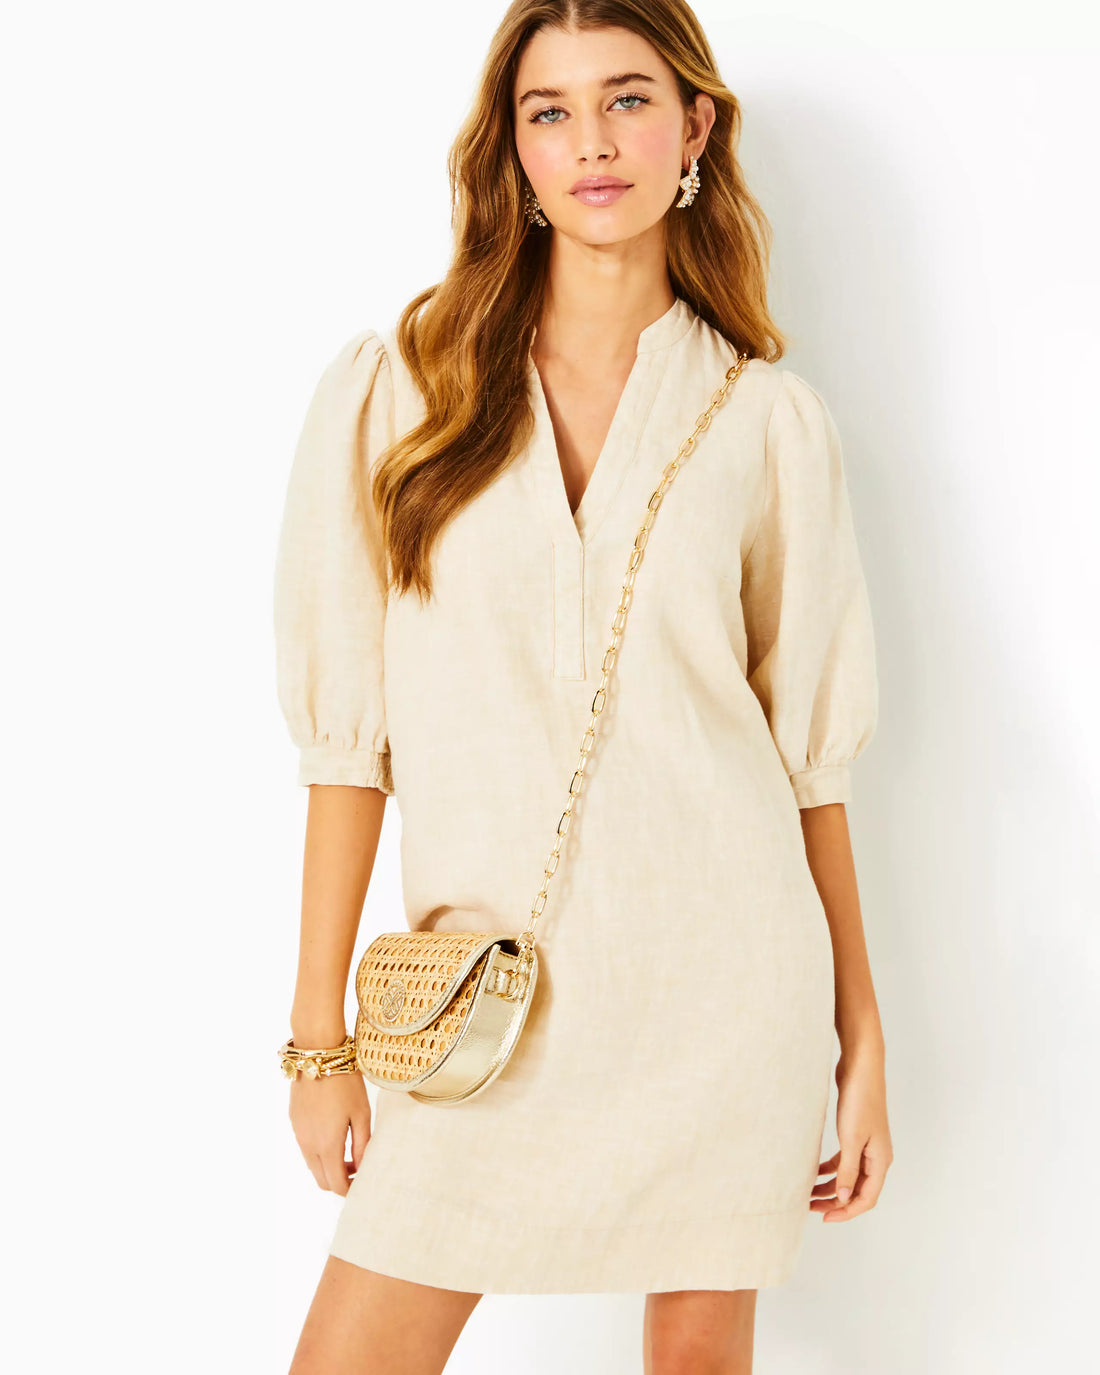 Lilly Pulitzer | Mialeigh Elbow Sleeve Linen Shift Dress